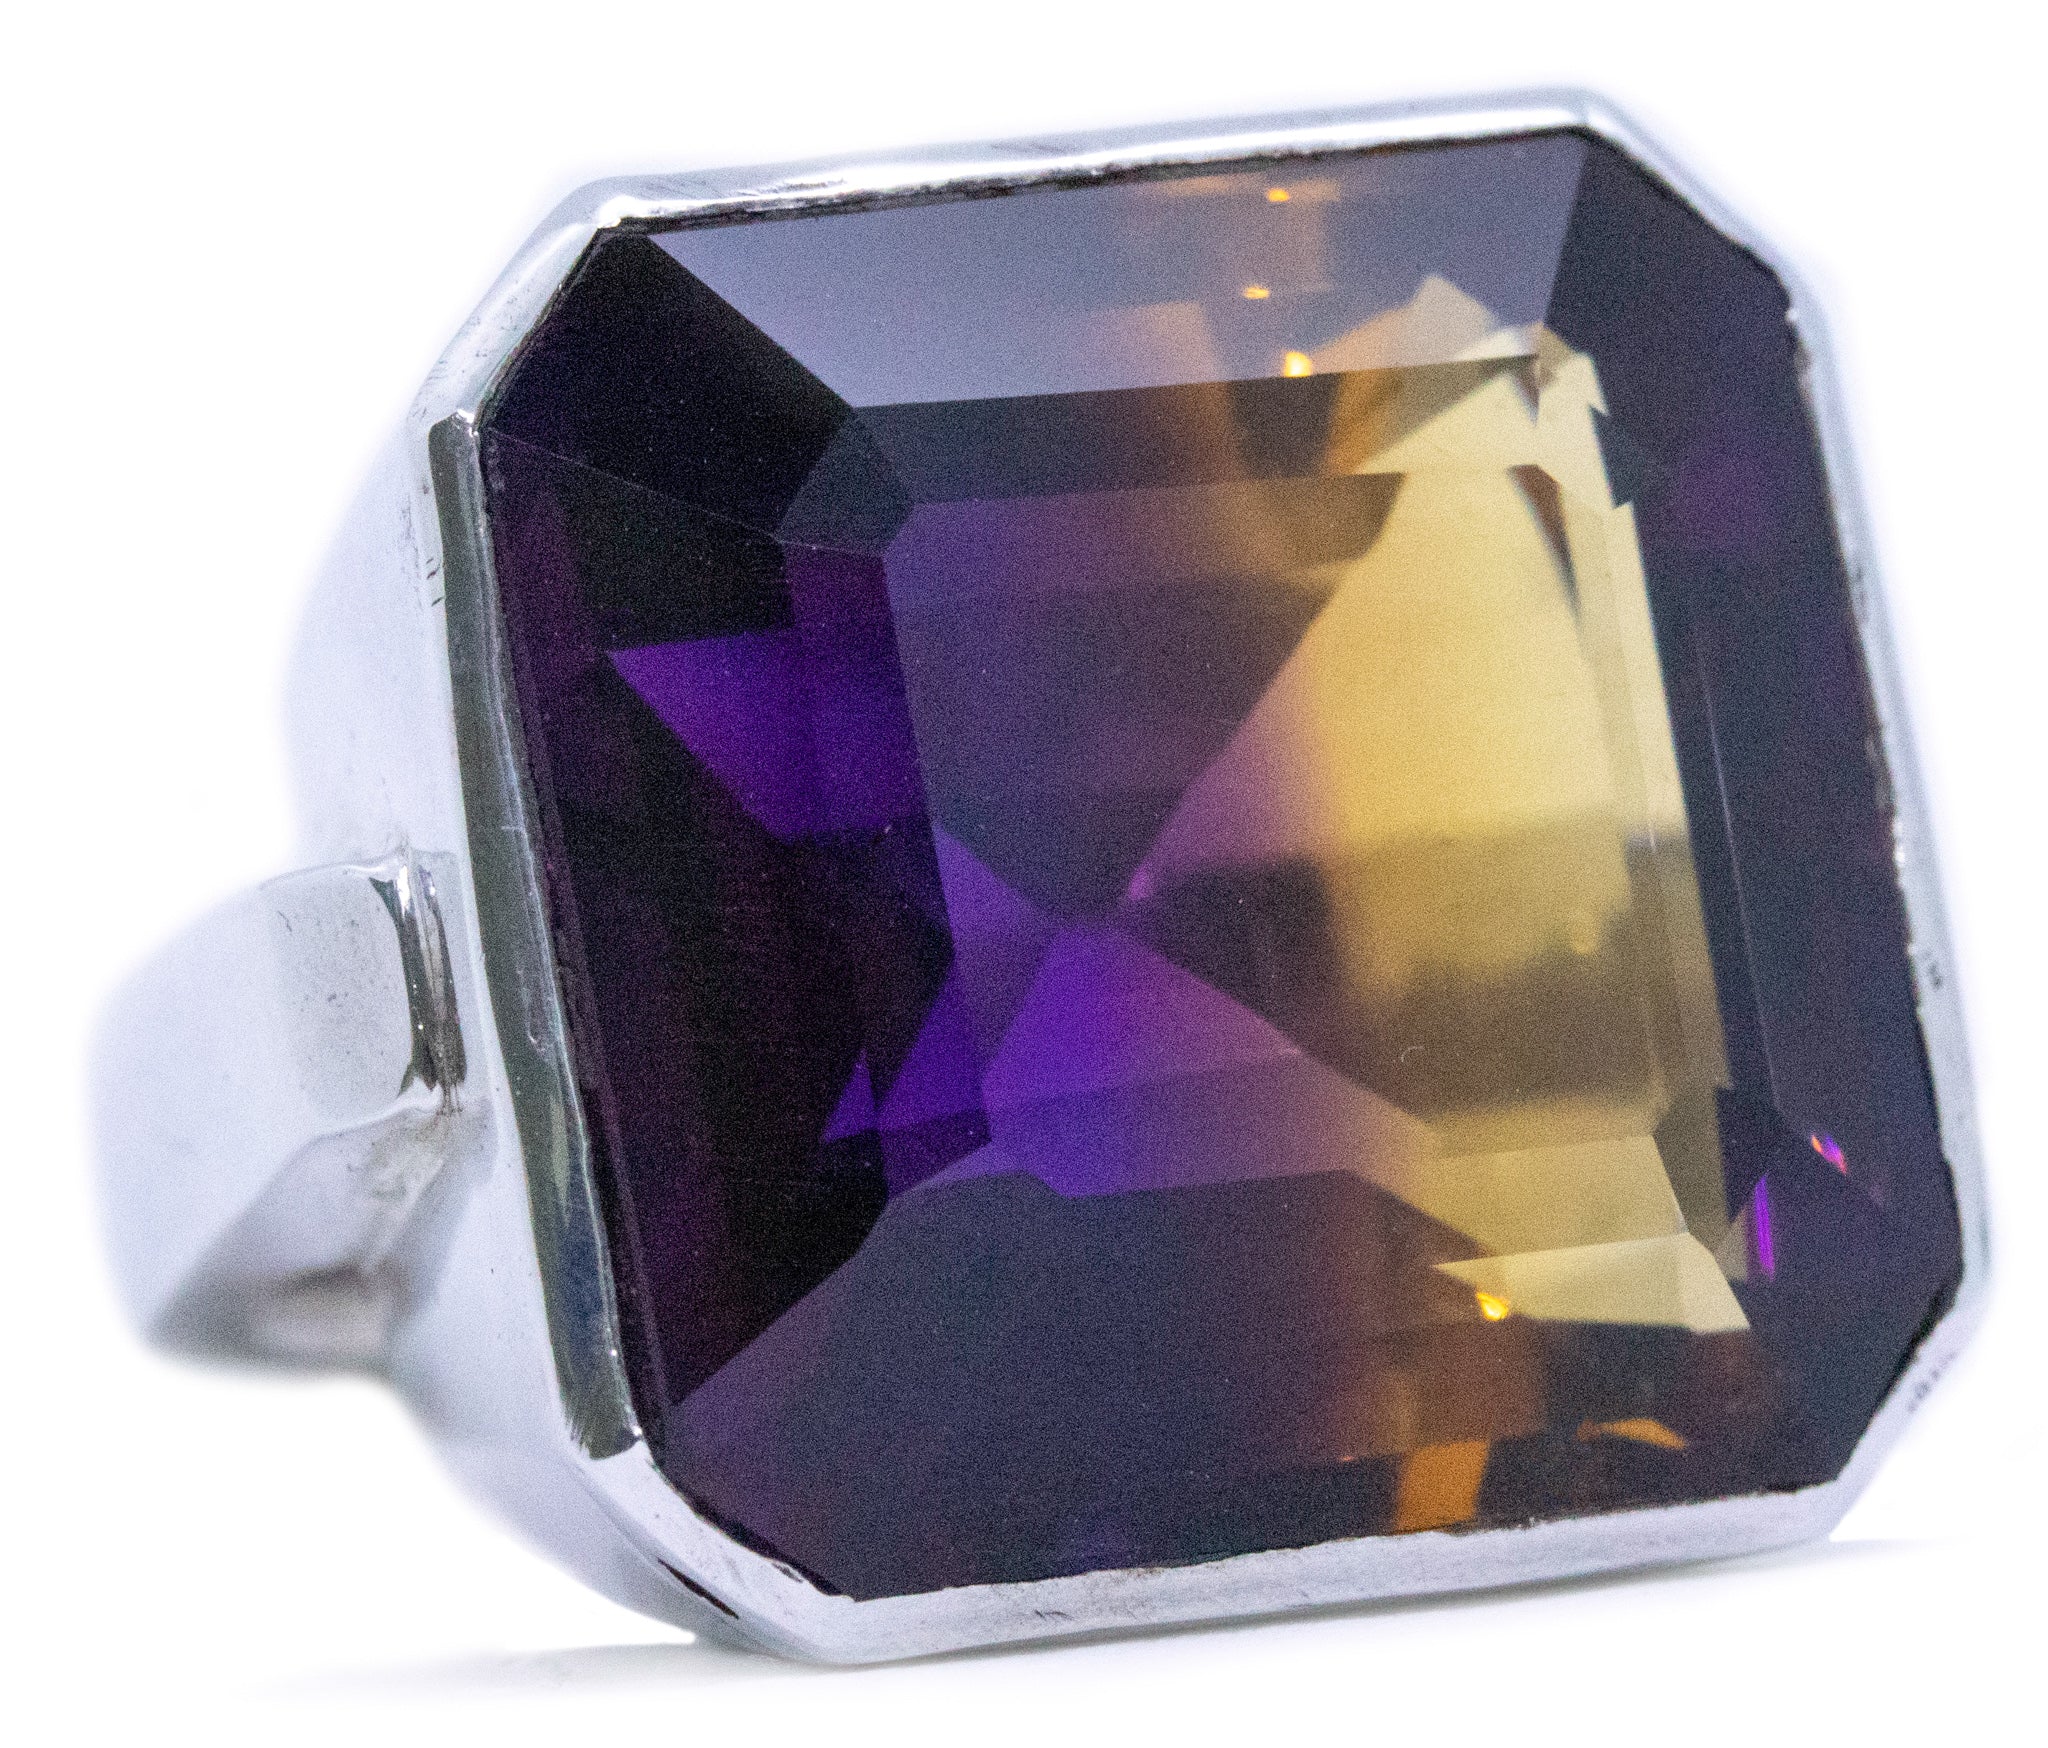 MODERN STERLING SILVER GEOMETRIC RING WITH A MASSIVE 40.09 Cts AMETRINE